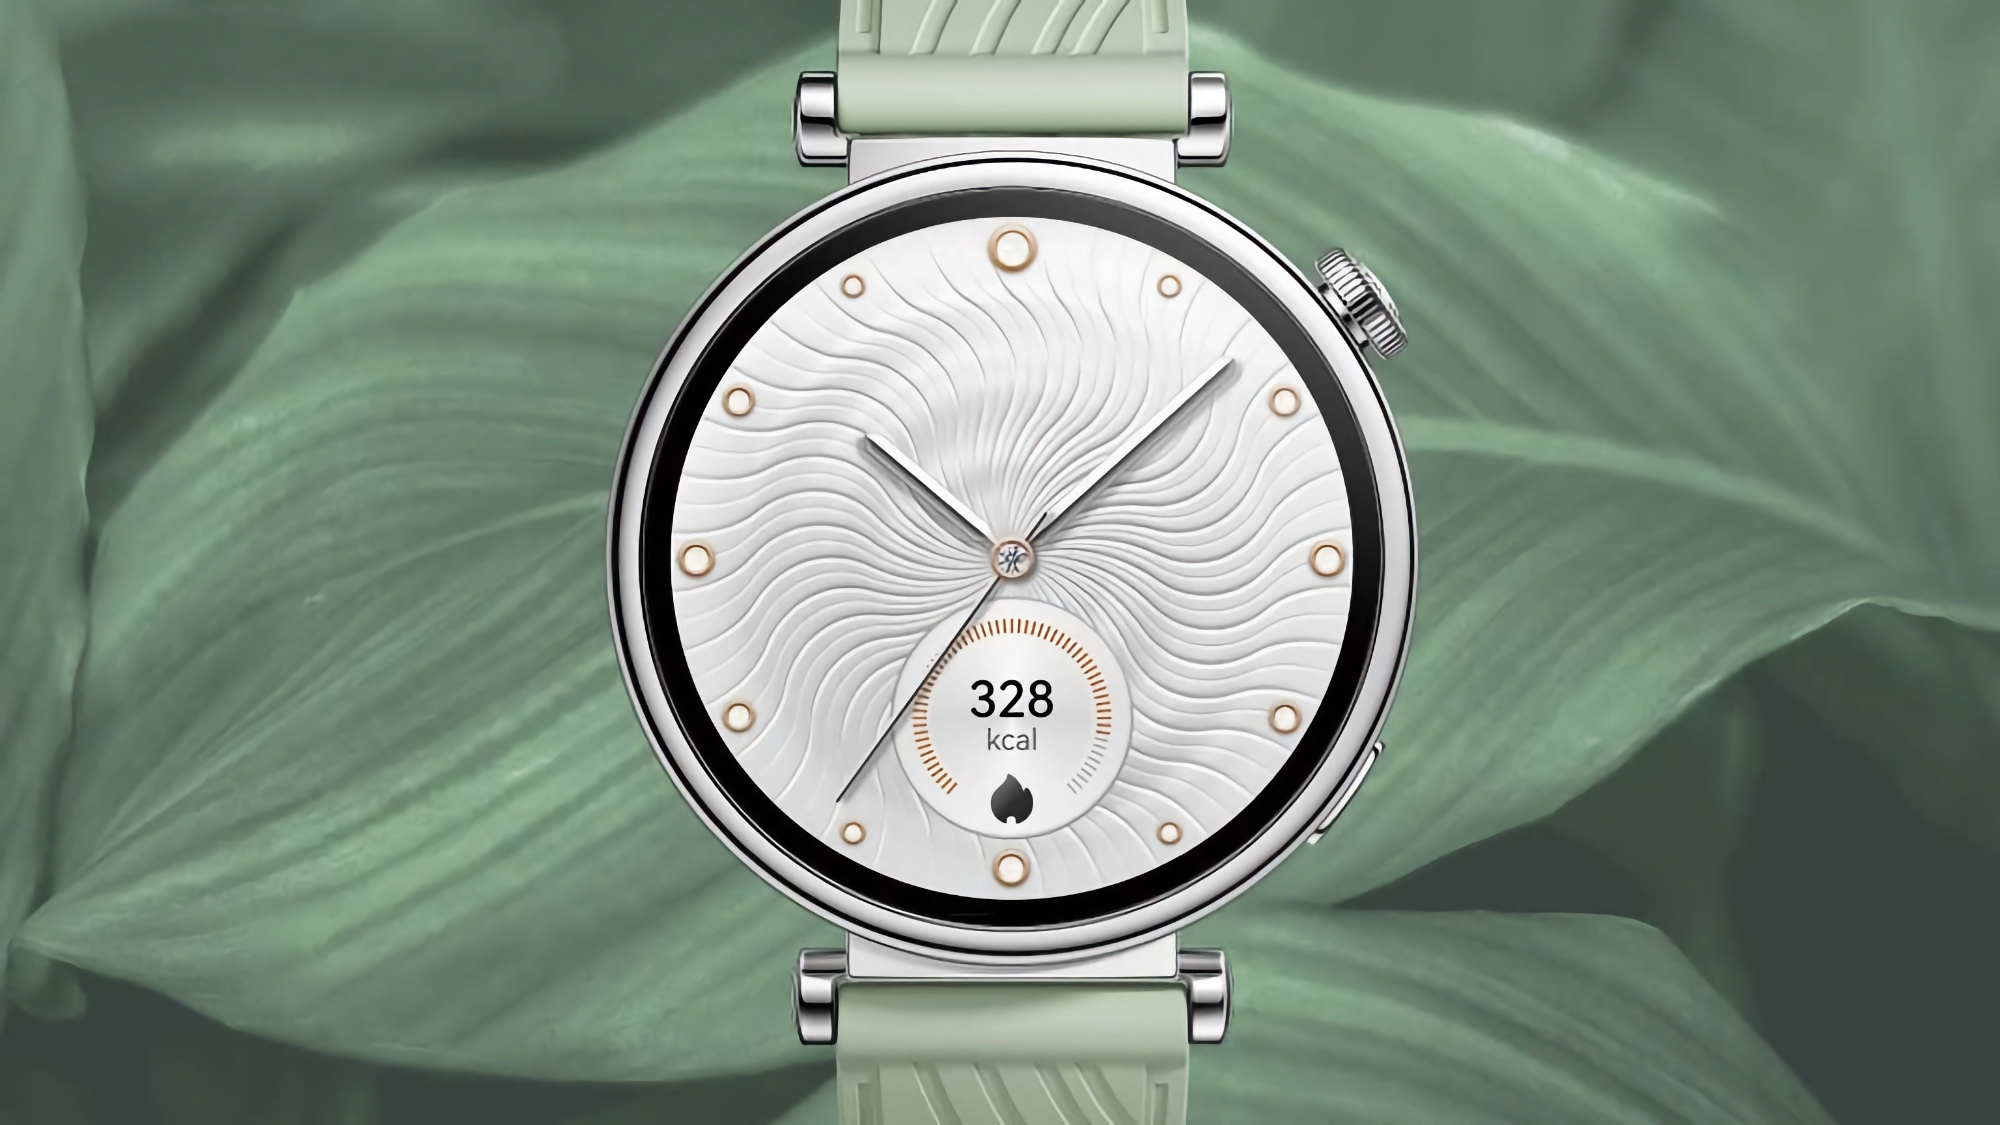 Huawei Watch GT 4 is now available in Green-Silver colour in the global marketplace